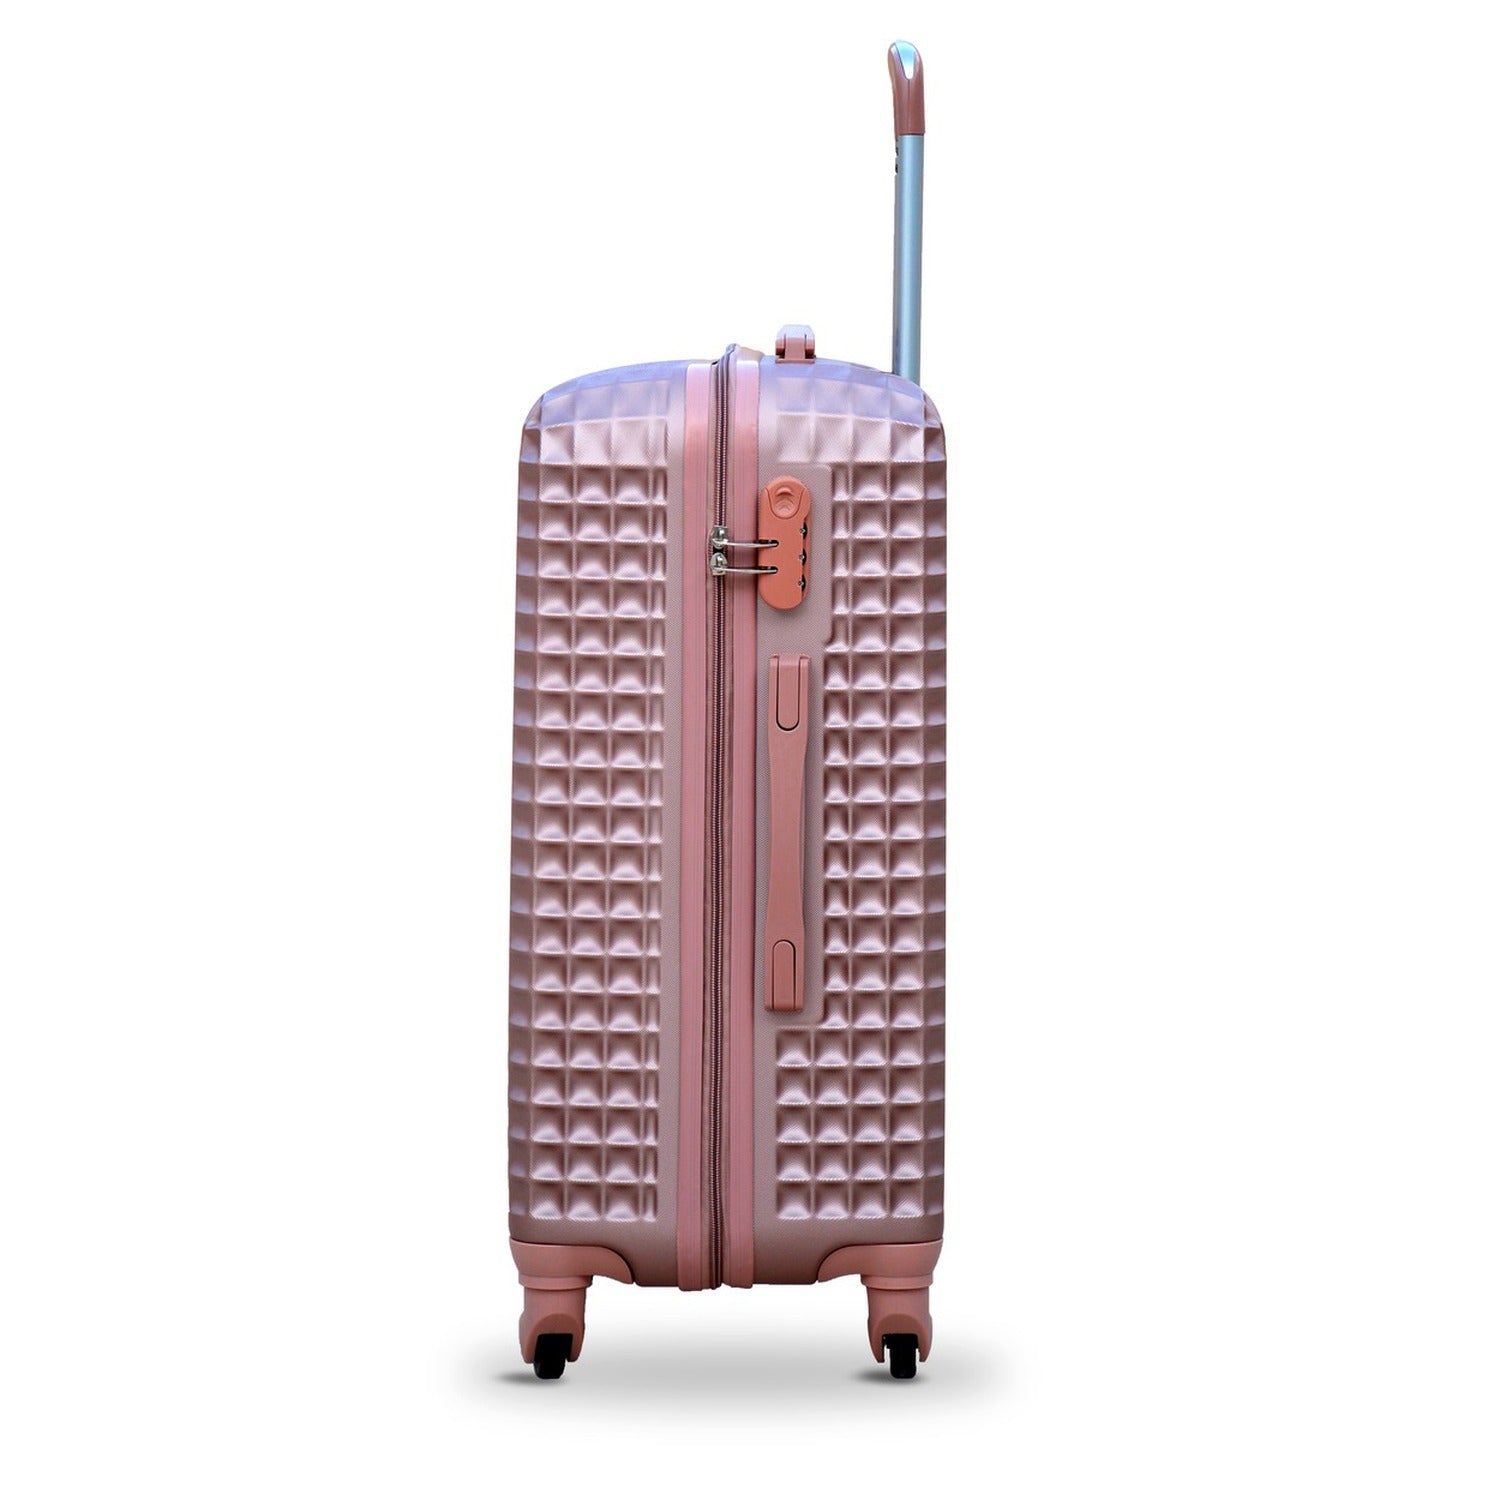 24" Rose Gold Colour Square Cut ABS Luggage Lightweight Hard Case Trolley Bag Zaappy.com